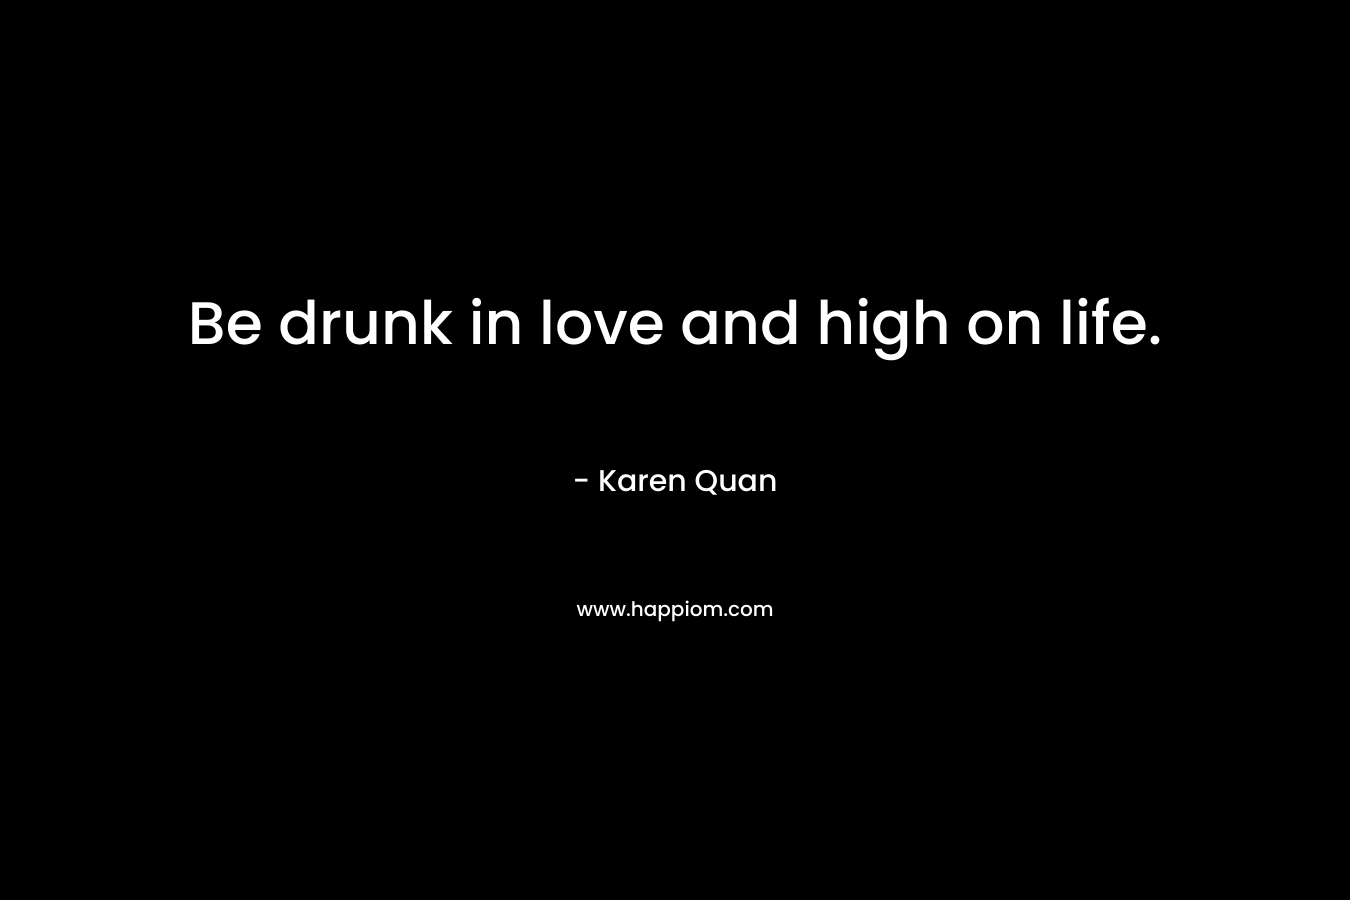 Be drunk in love and high on life.